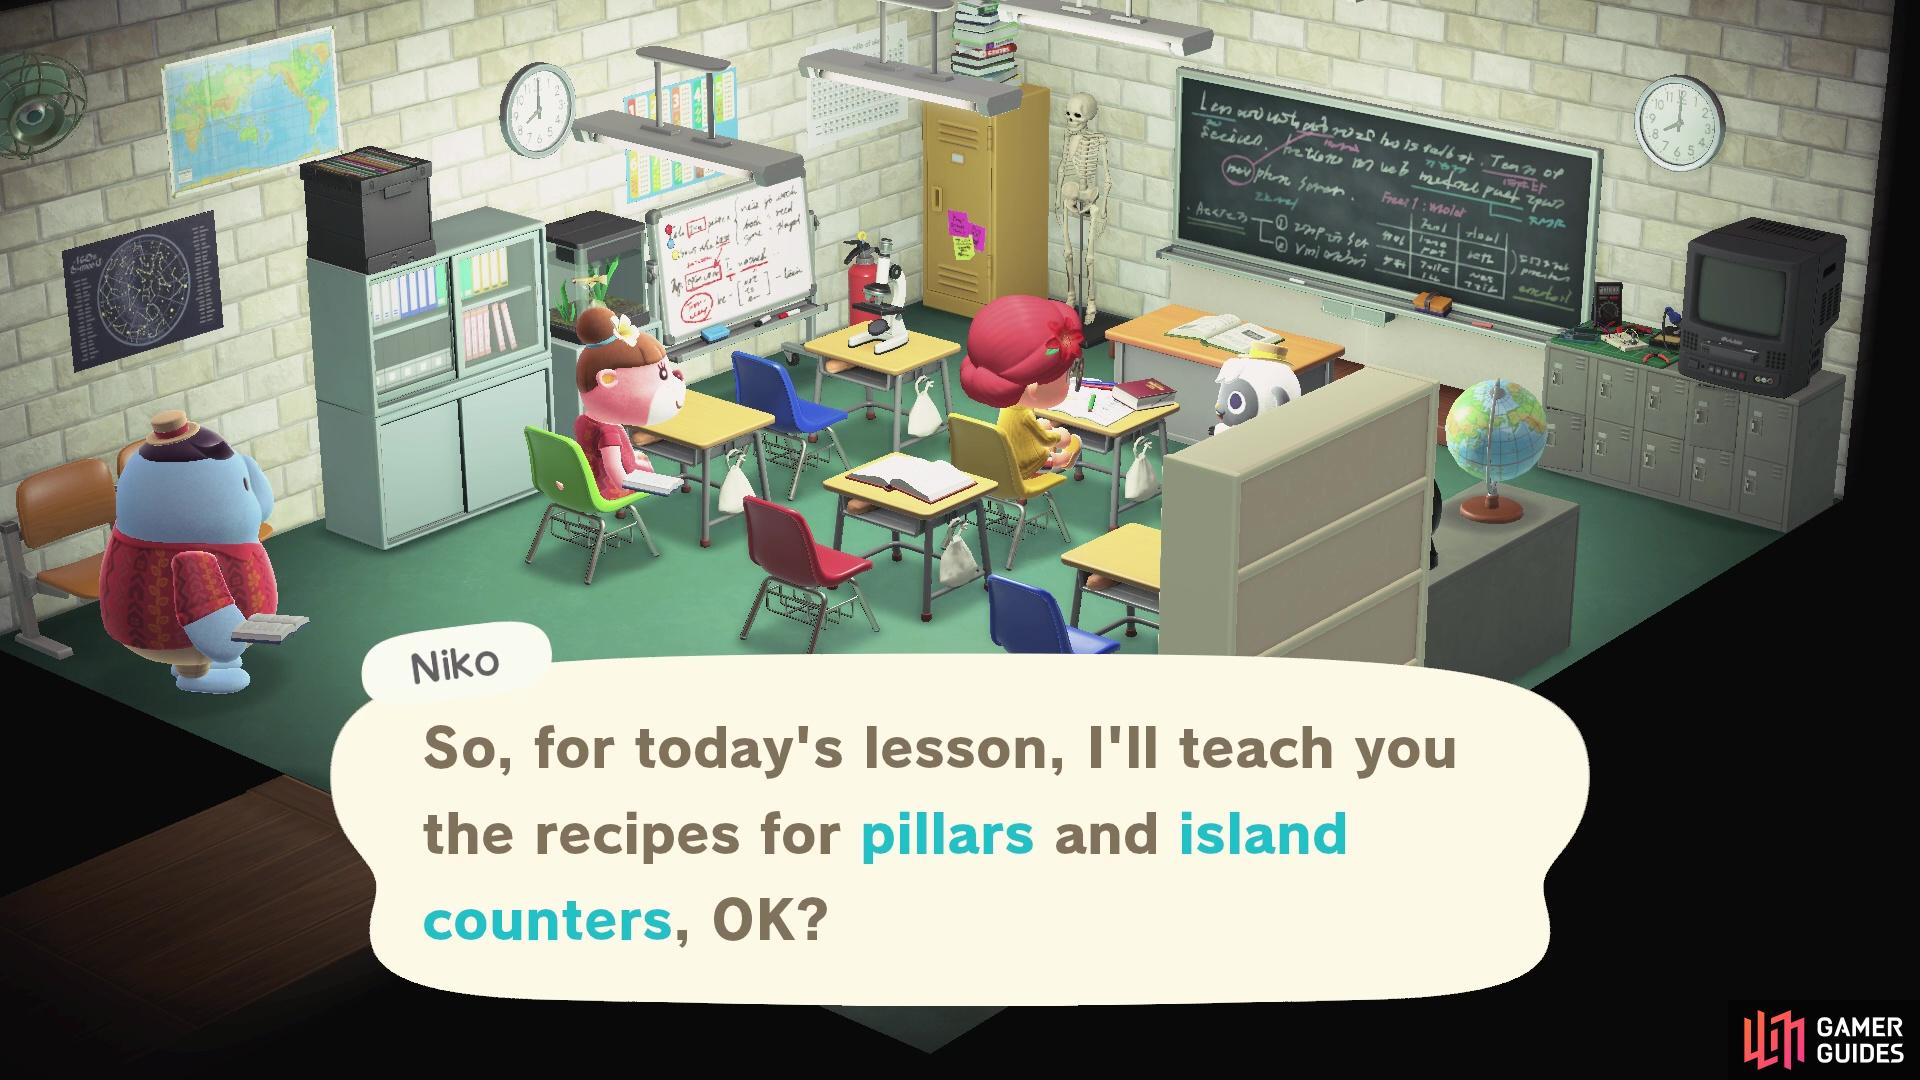 Niko is about to teach you all about pillars and island counters.